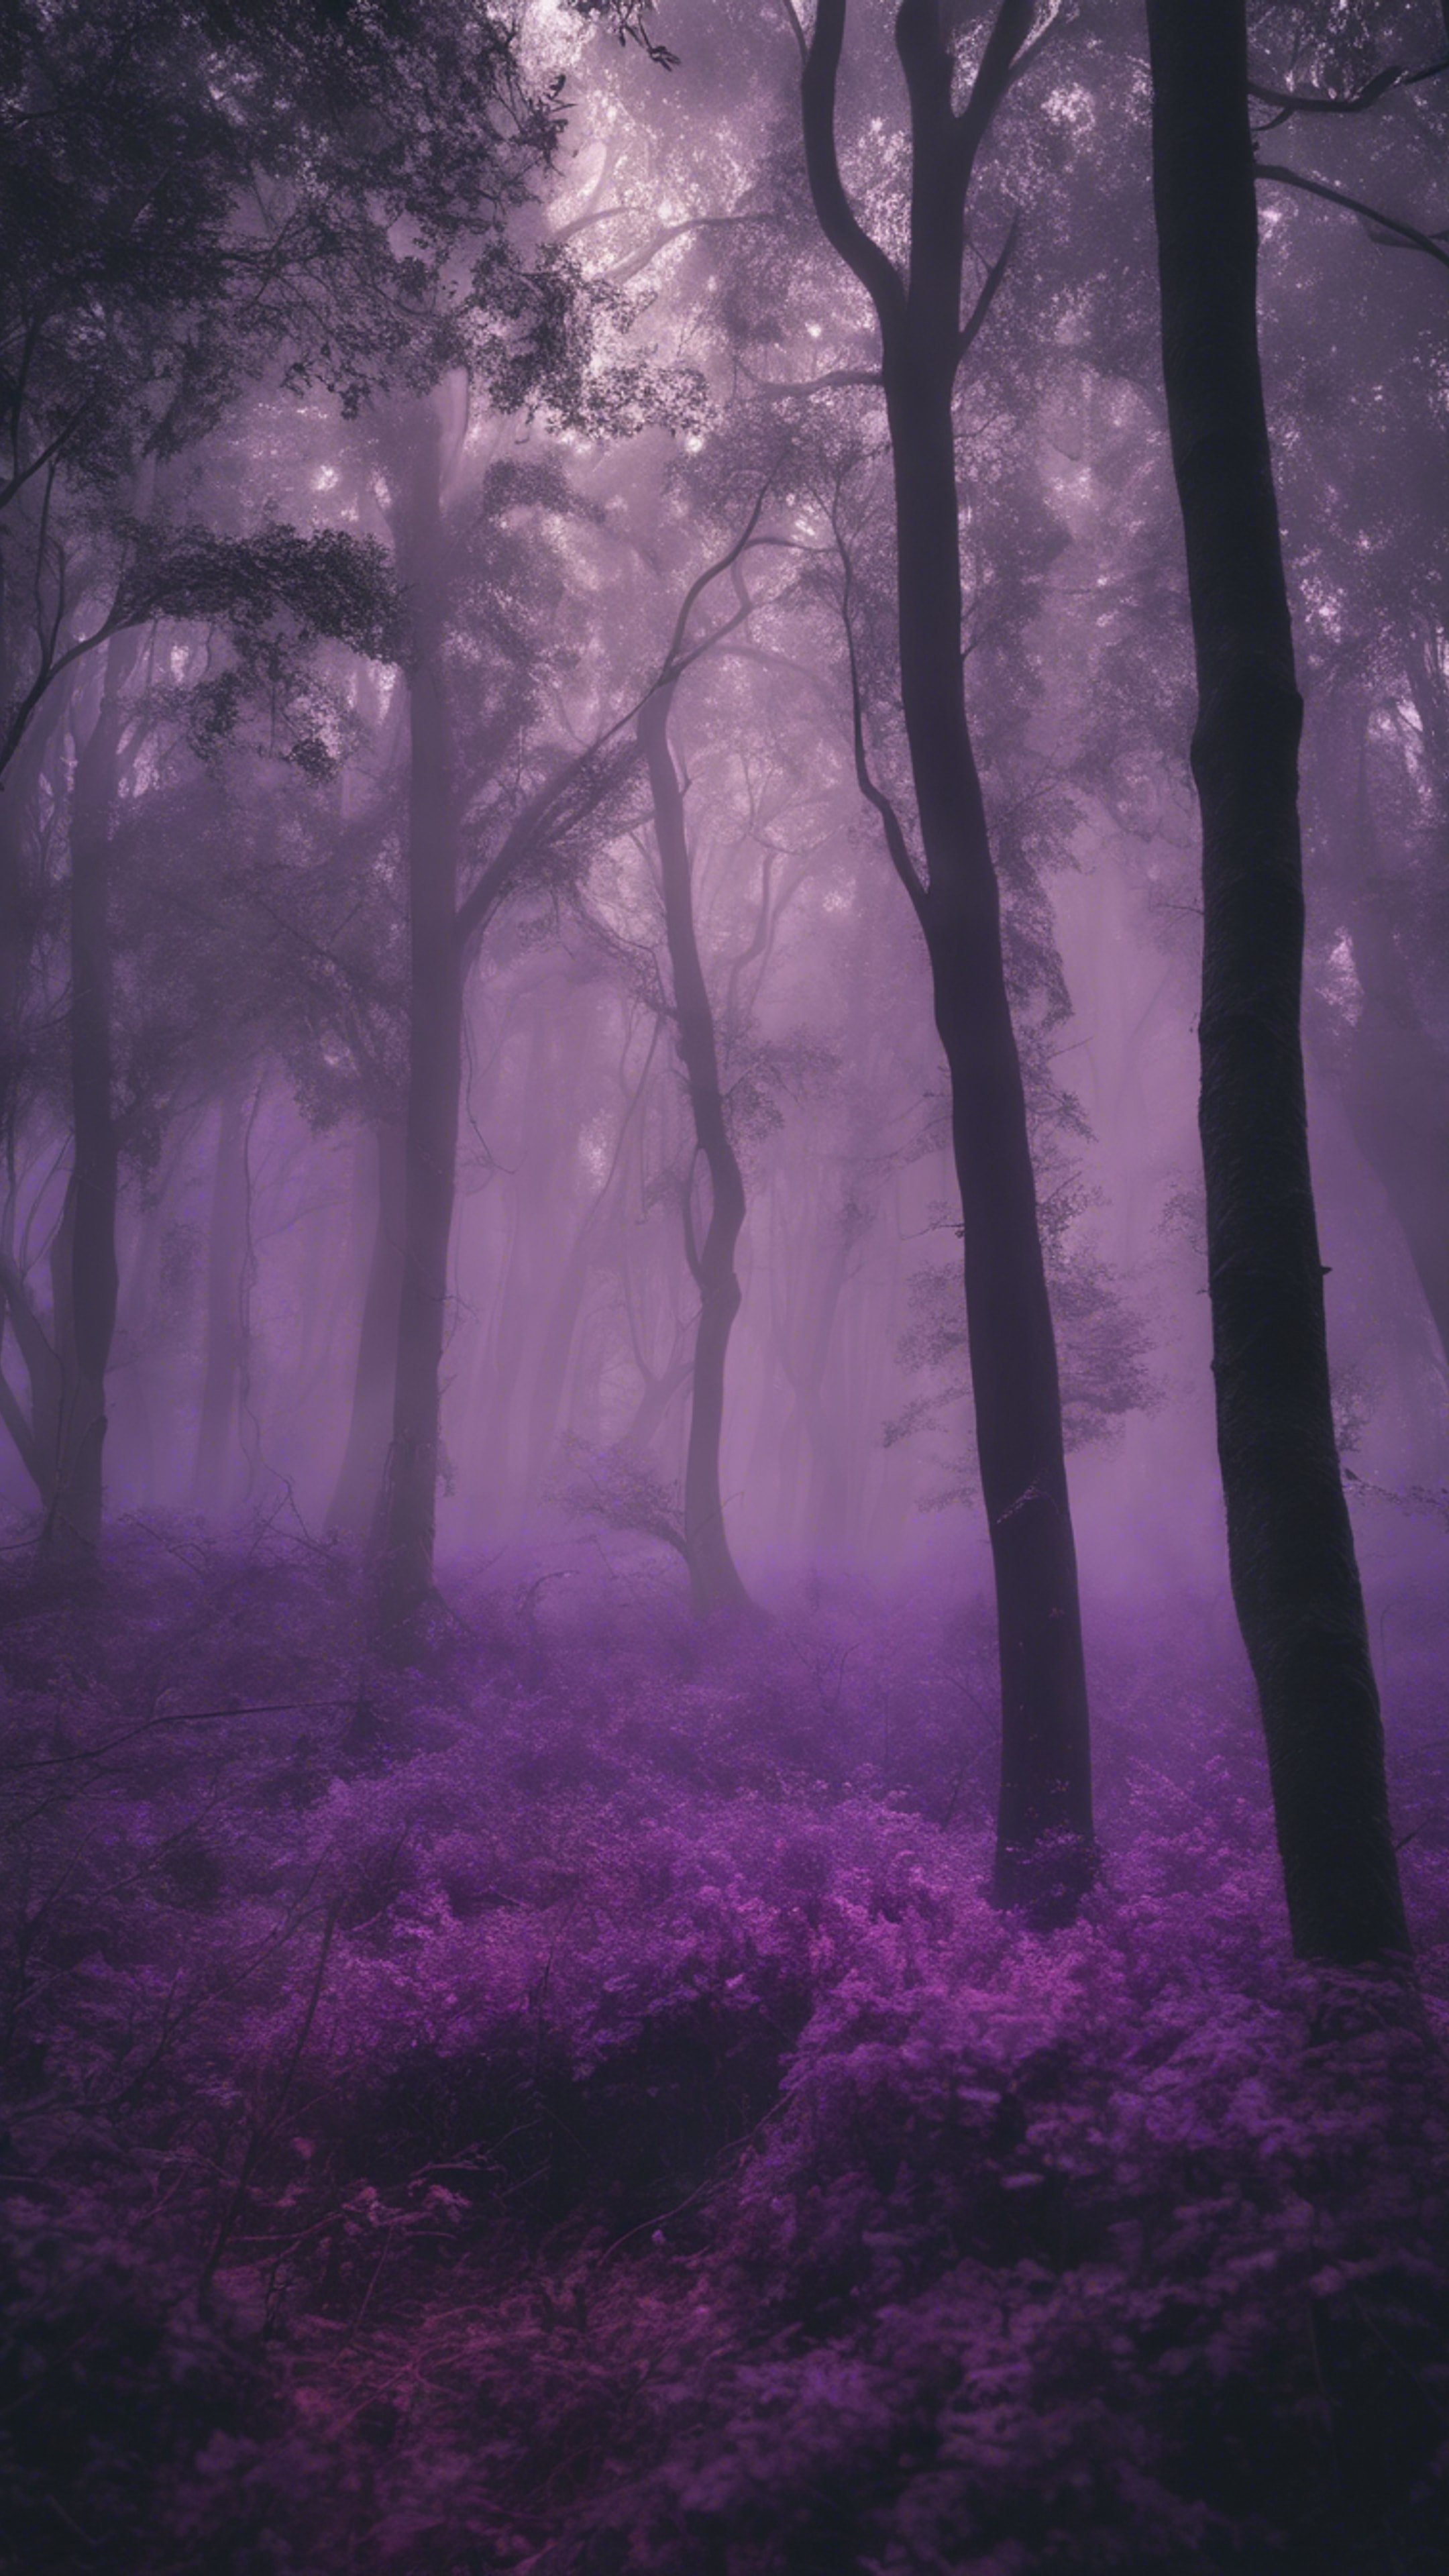 An eerie forest shrouded in a cool dark purple mist.壁紙[6dd2a5a50e3c4ca29835]